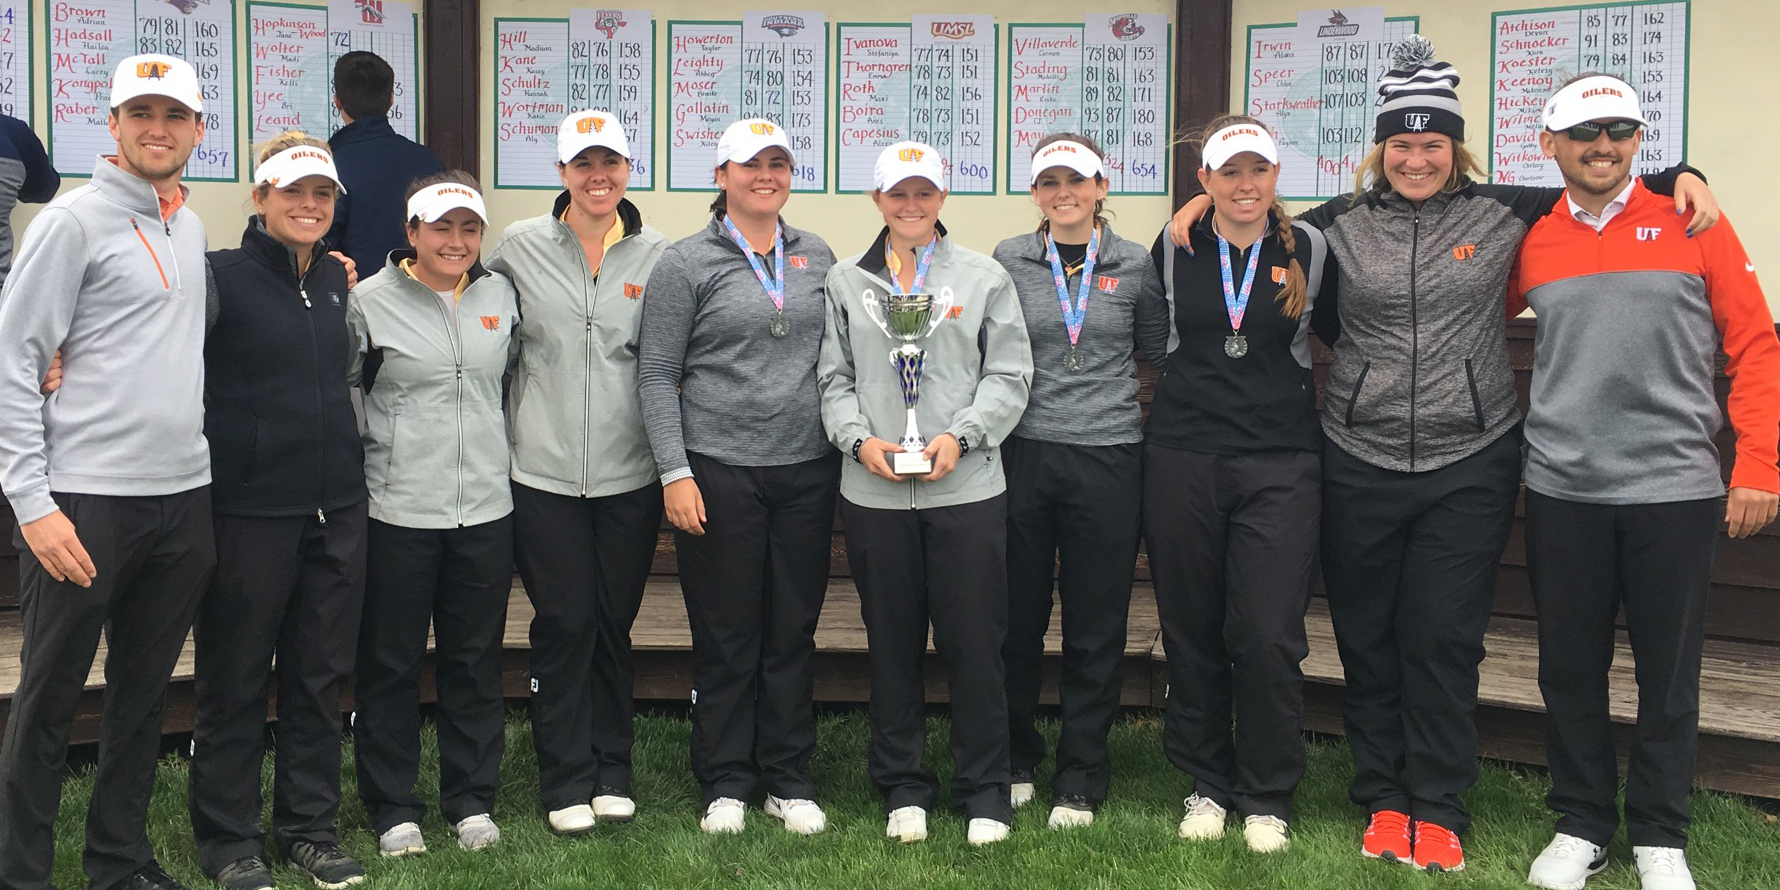 Multiple Records Set in 19-Shot Win at UIS Invite